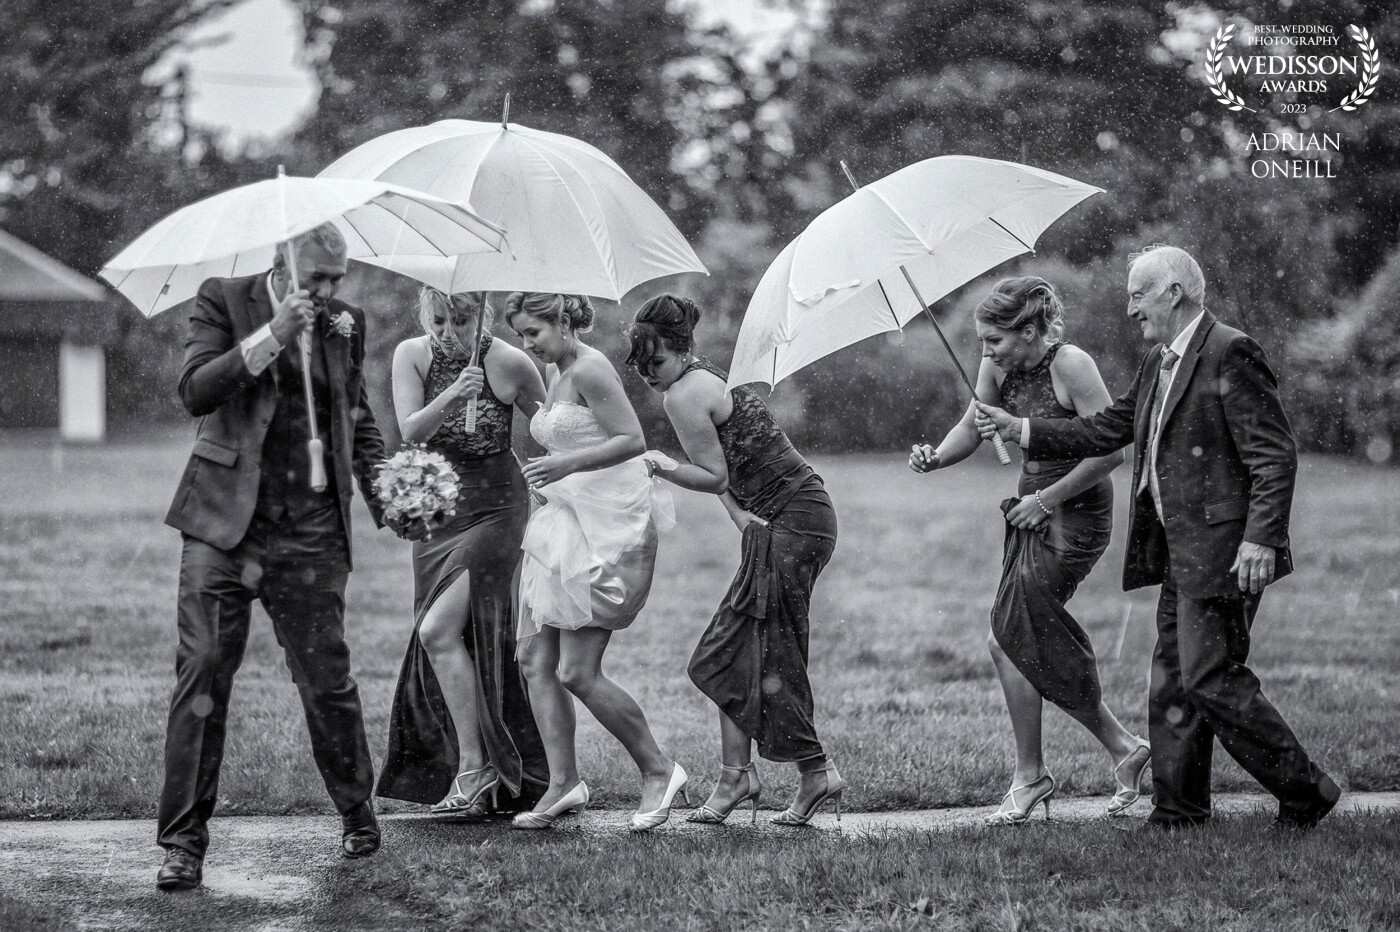 One of my faves!!! captured this image in the pouring rain. The bridal party were making a quick dash to the church...the were umbrellas flying all over the place!!! this is a side to my wedding photography that I don't usually show, but the moment was too good not to share.